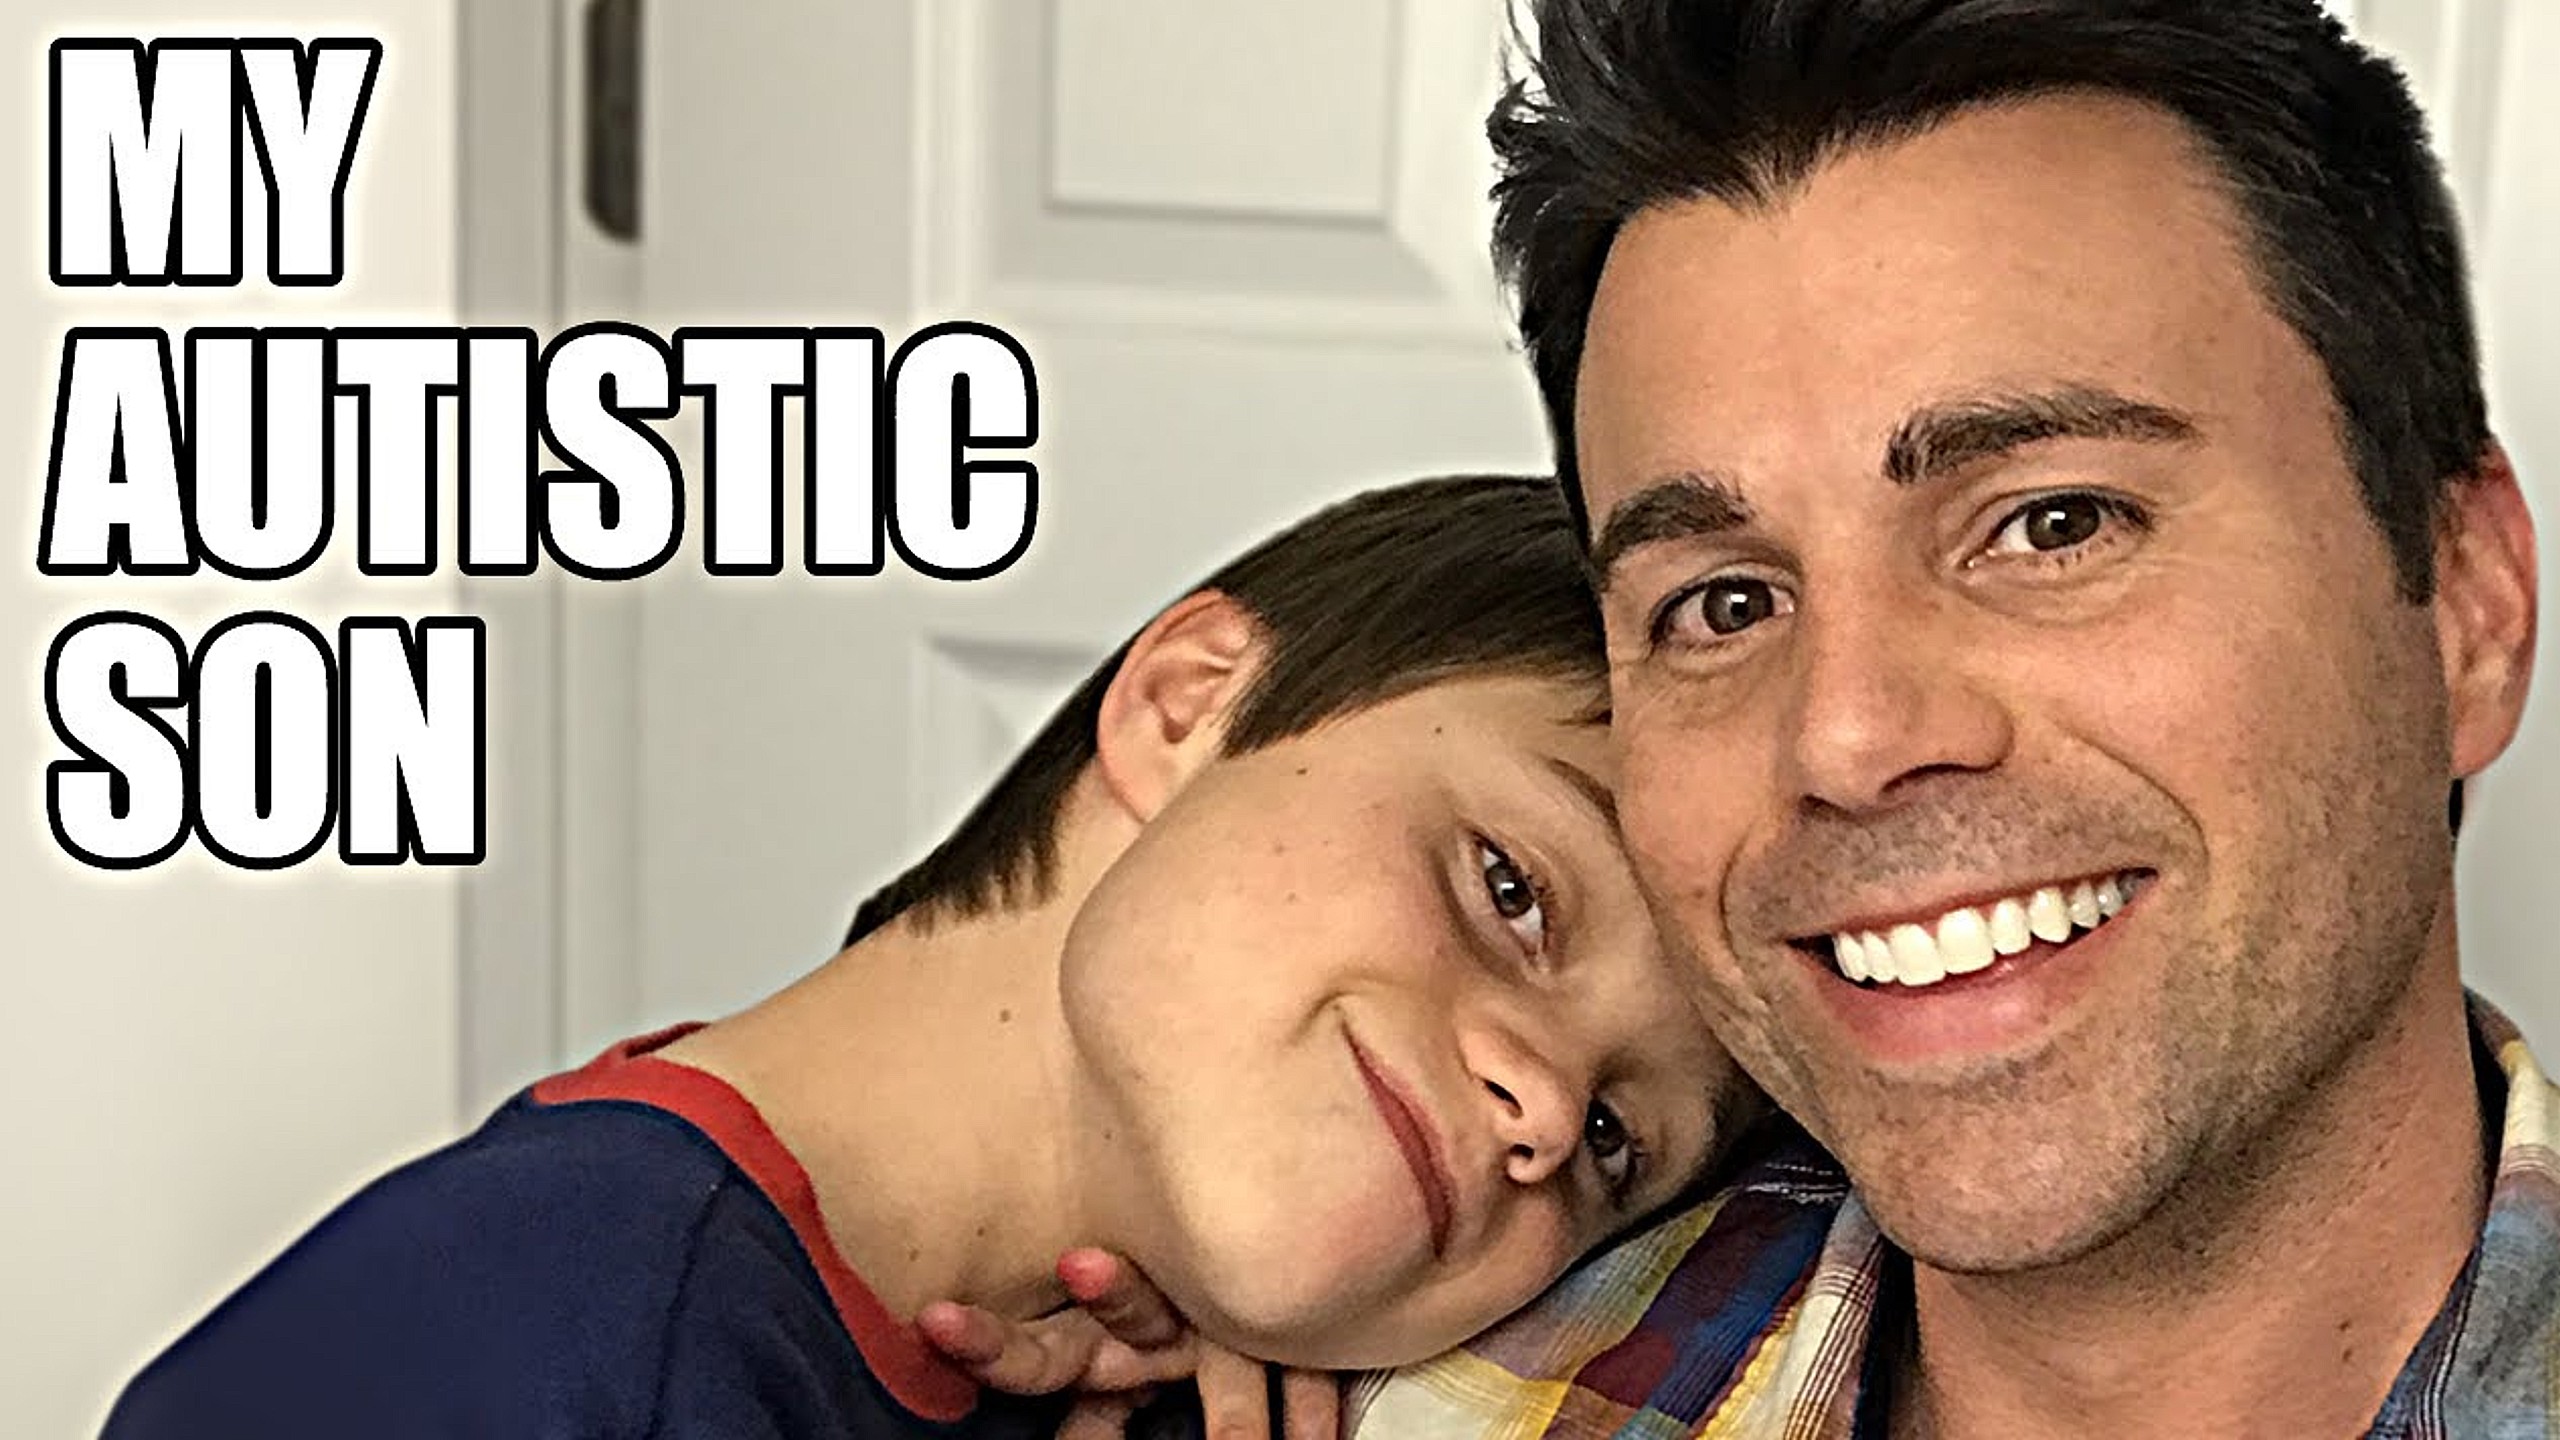 Mark Rober discusses son with autism